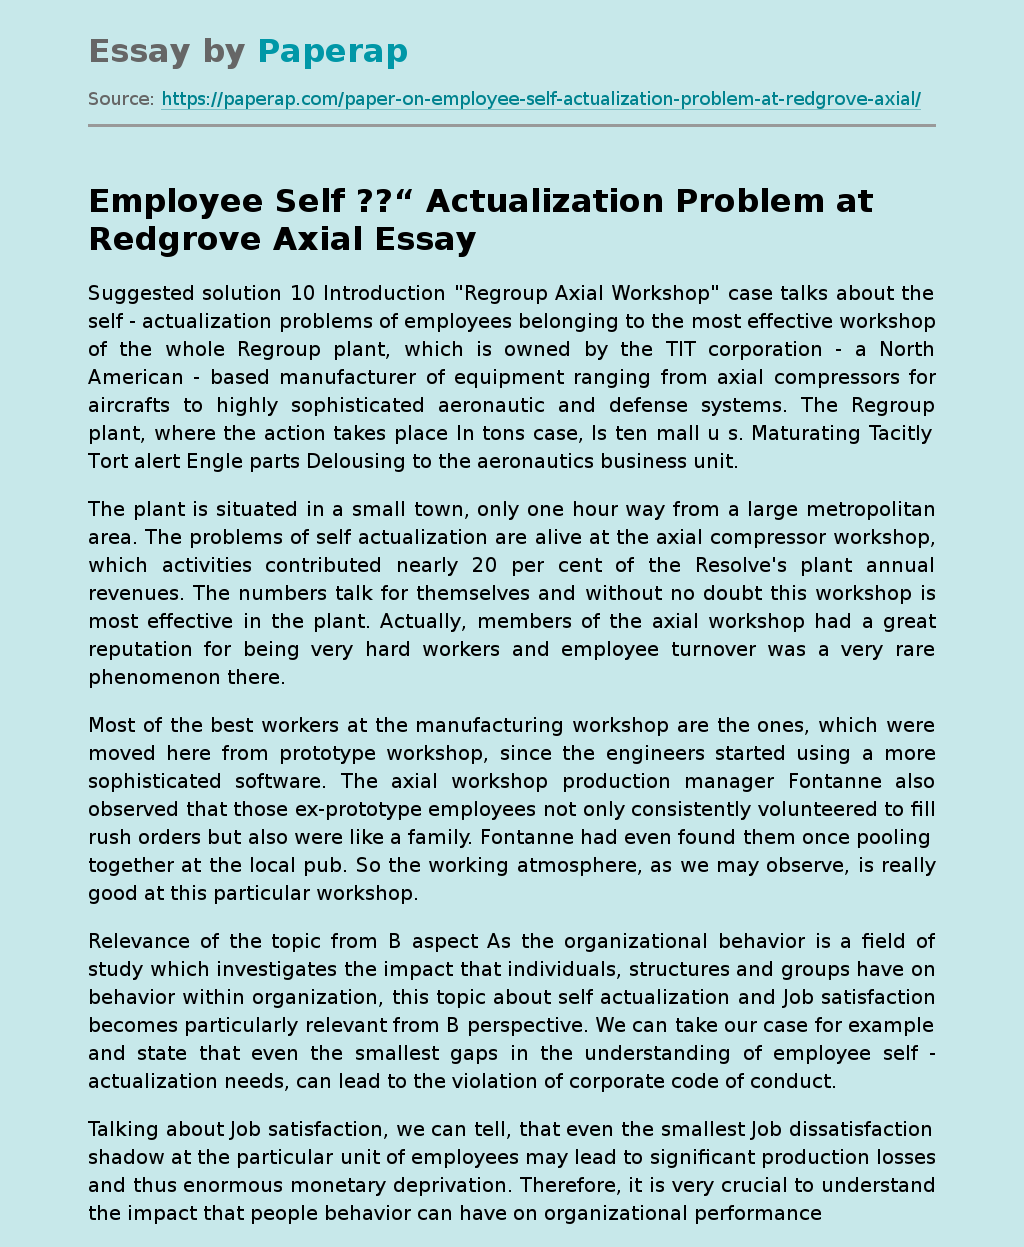 Employee Self ??“ Actualization Problem at Redgrove Axial